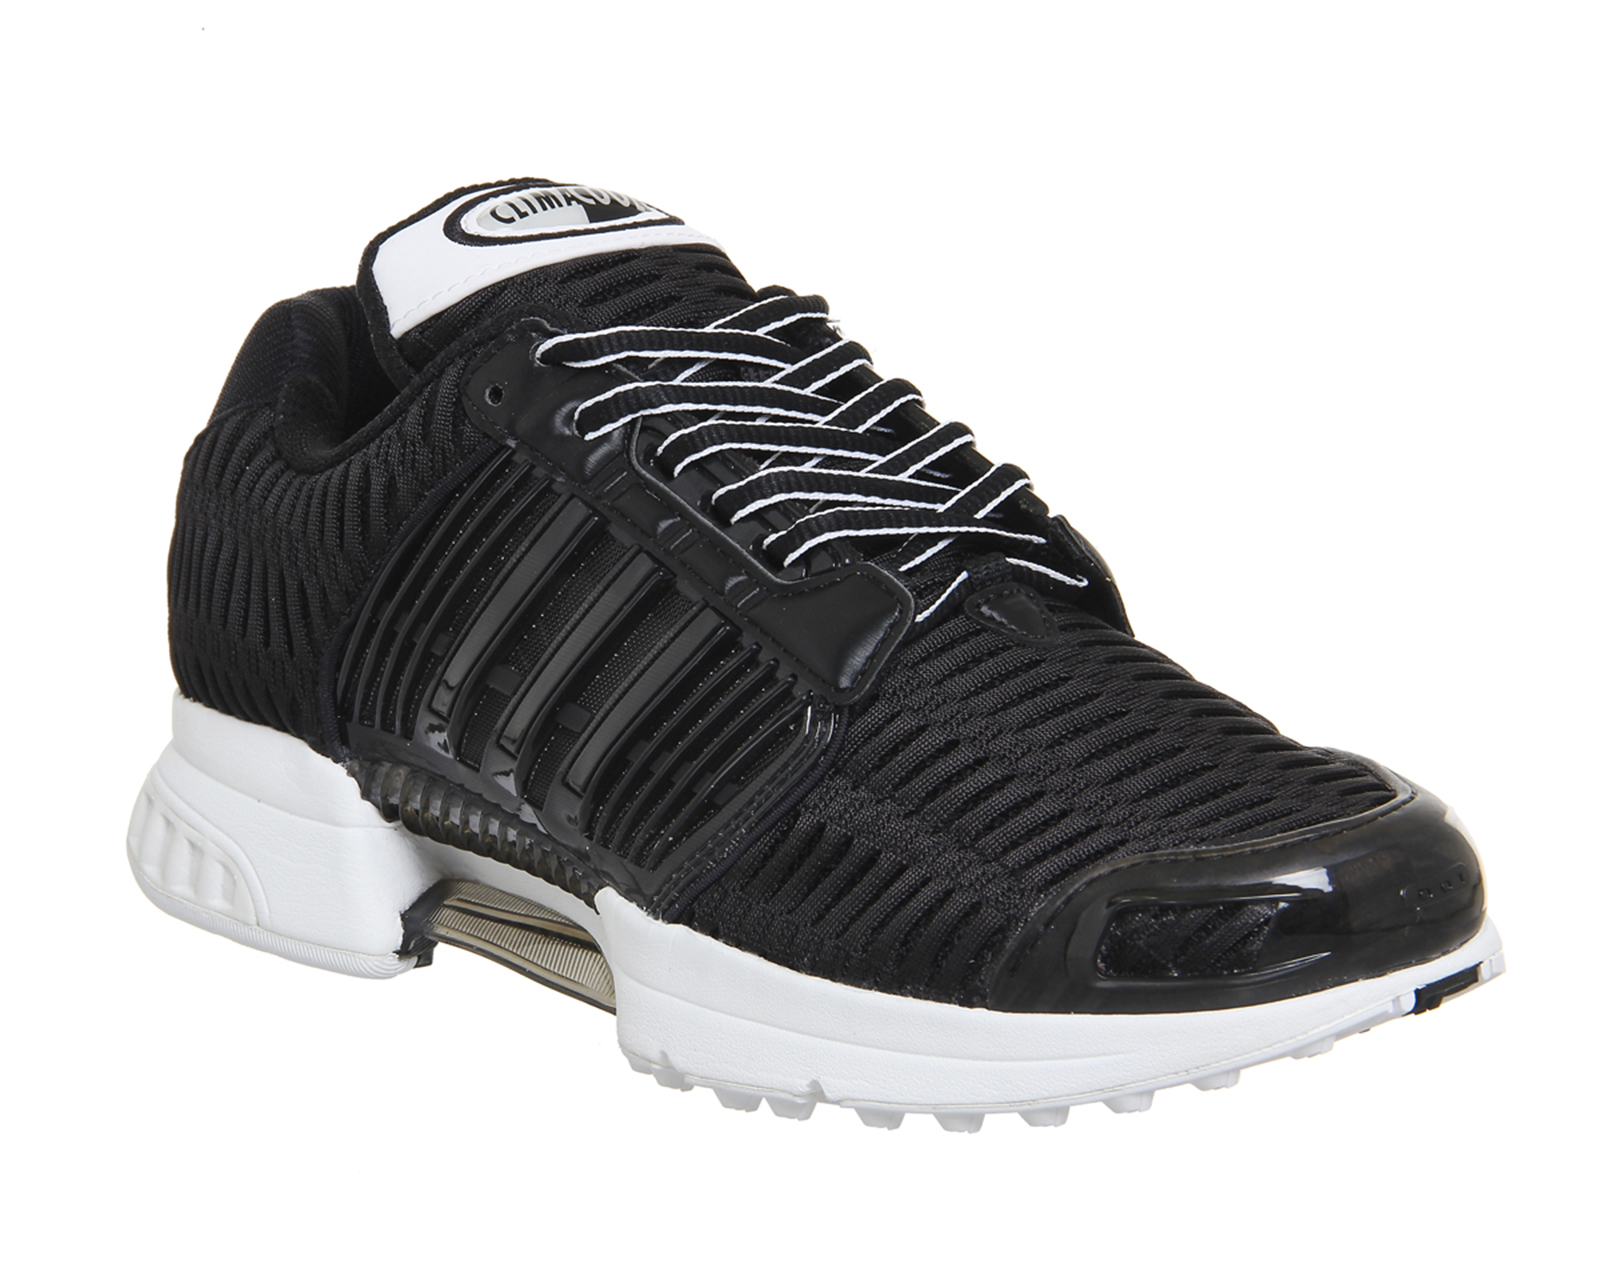 adidas Climacool 1 Black Vintage White - His trainers